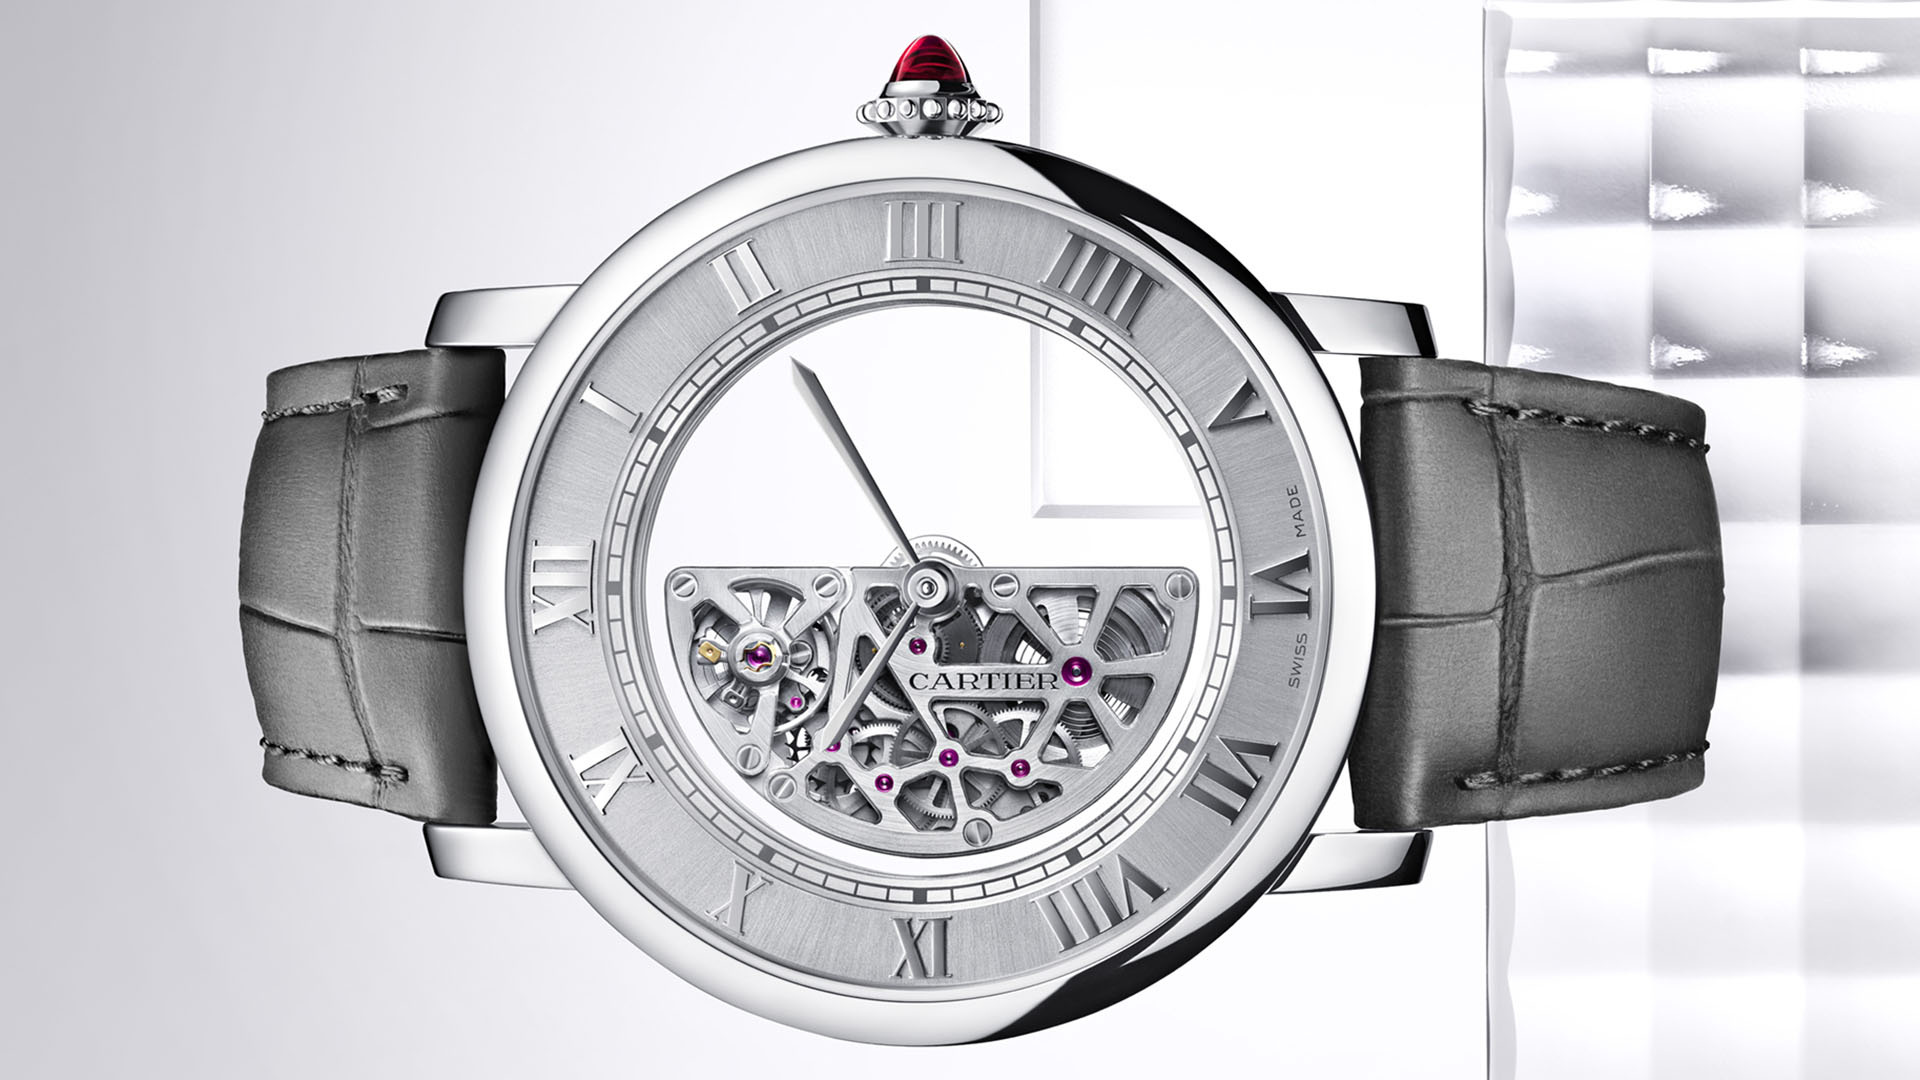 Cartier: Masse Mysterieuse watch, The mystery dial, One of the most dramatic styles in watchmaking. 1920x1080 Full HD Wallpaper.